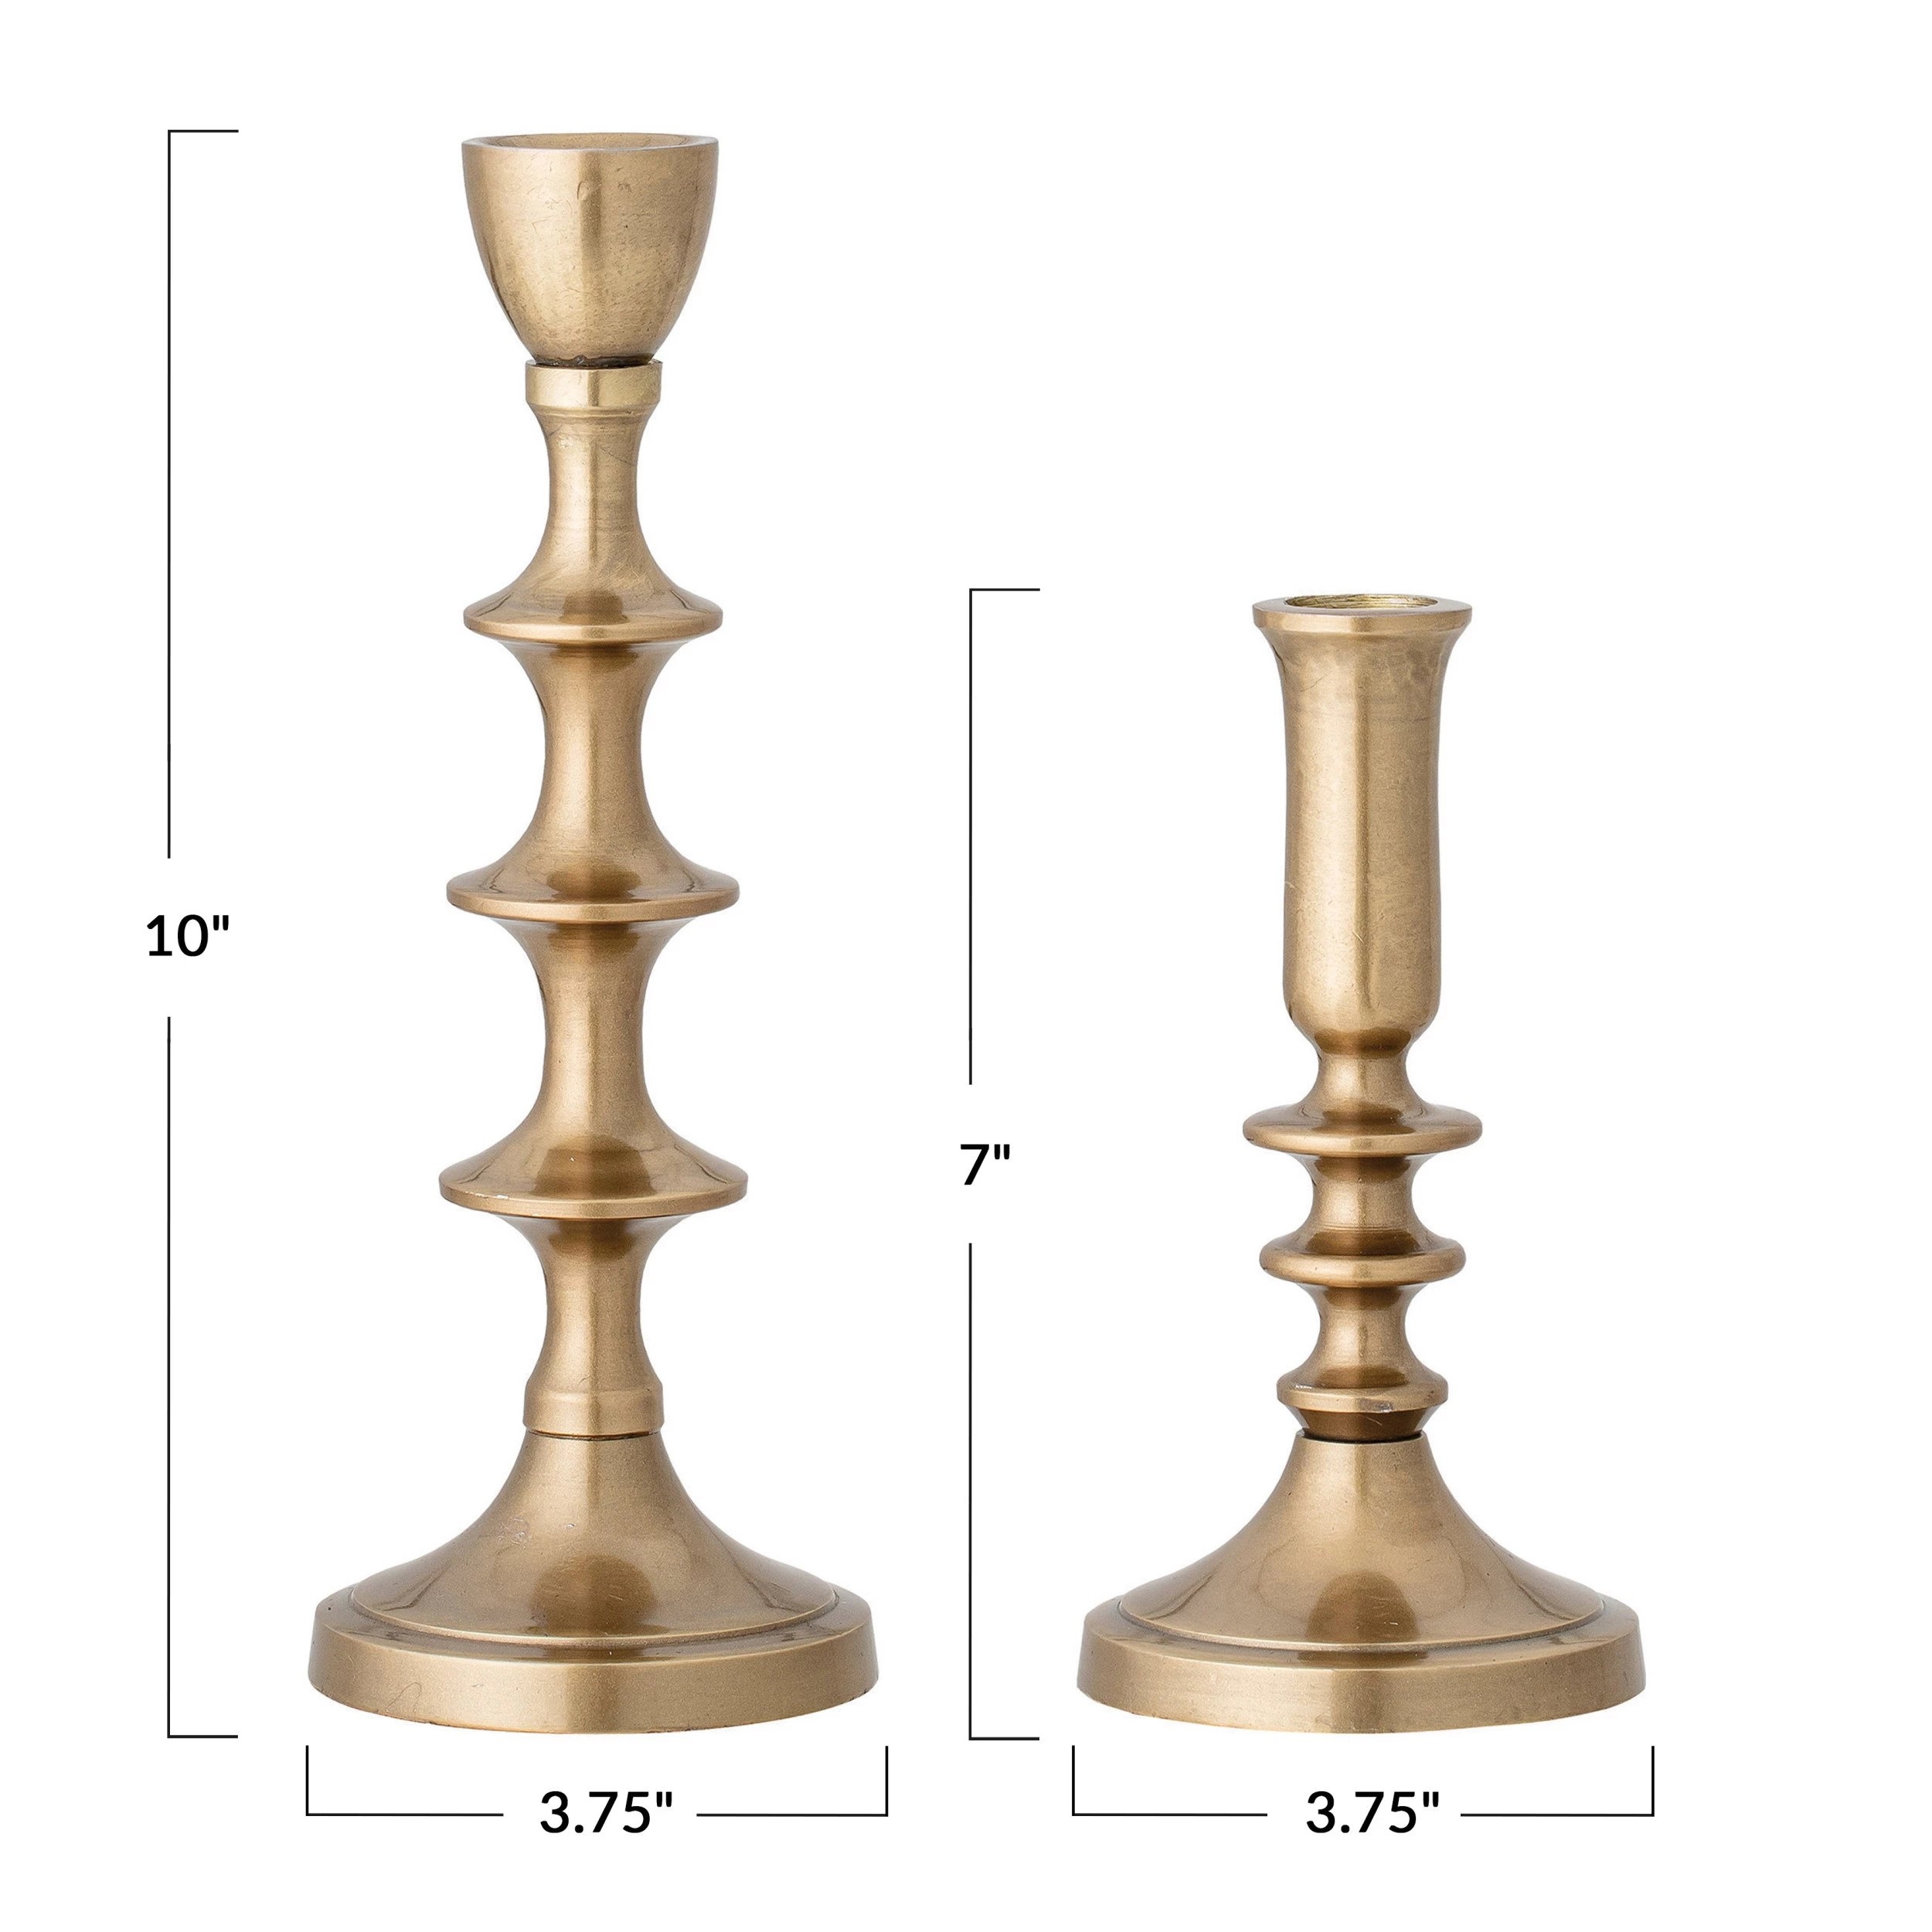 Decorative Taper Candle Holders, Gold, Set of 2 - Image 3